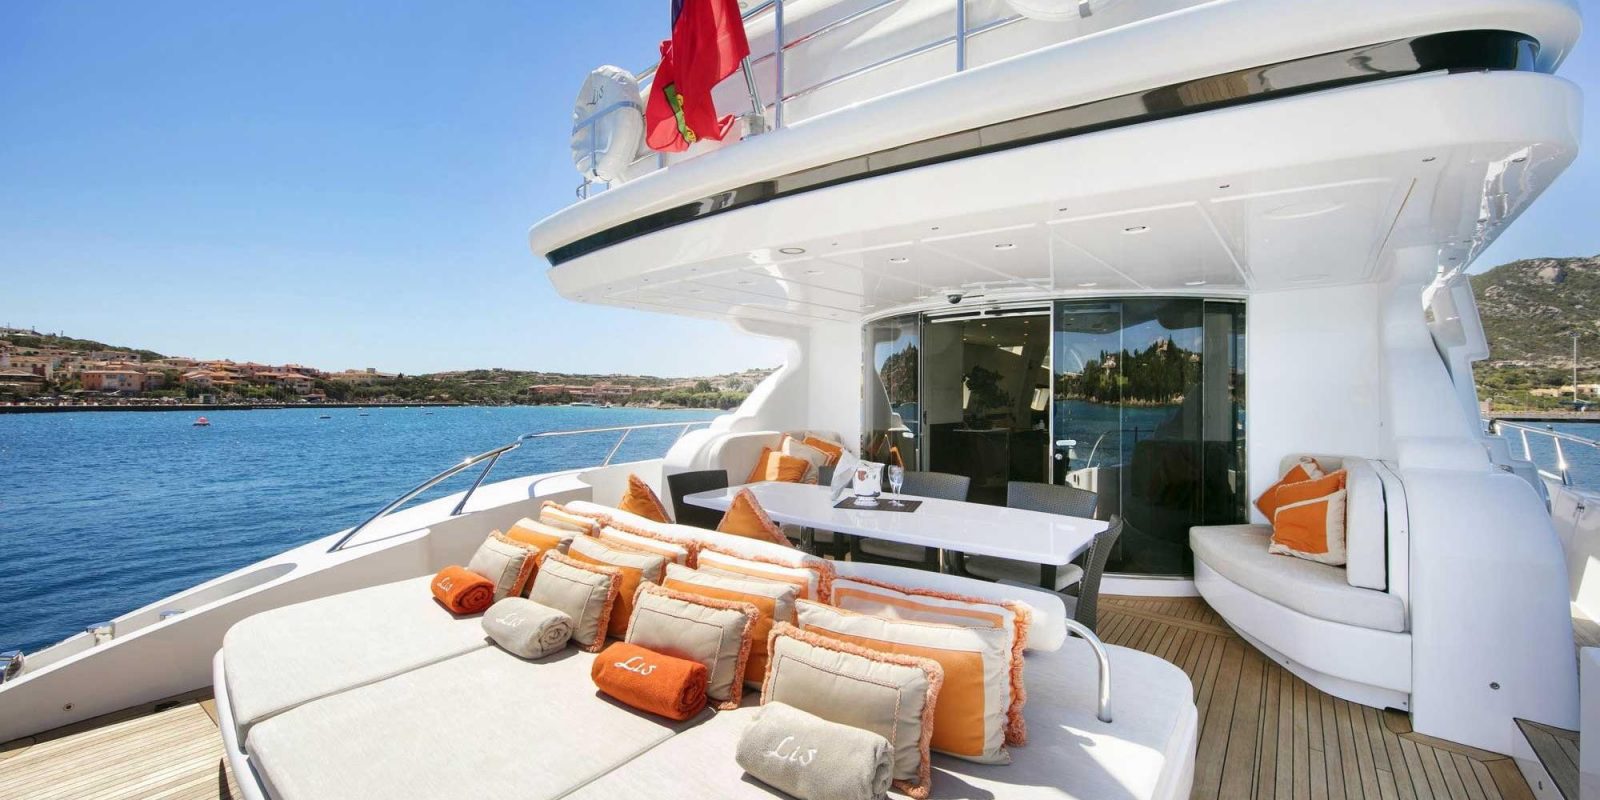 Aft Deck Seating And Sunbathing Area